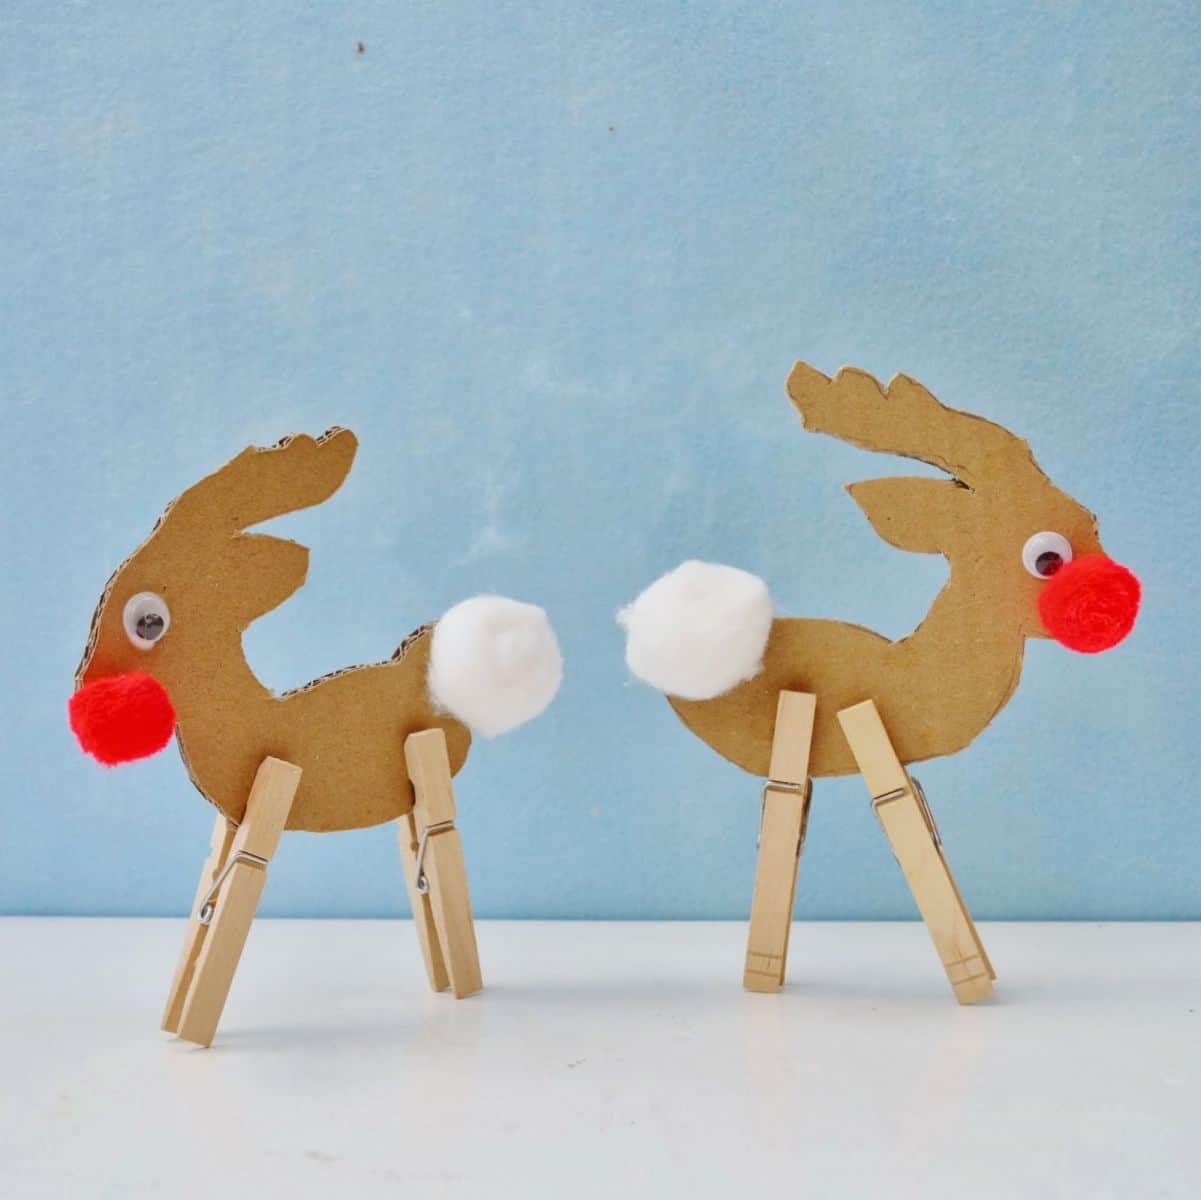 15 RIDICULOUSLY CUTE REINDEER CRAFTS